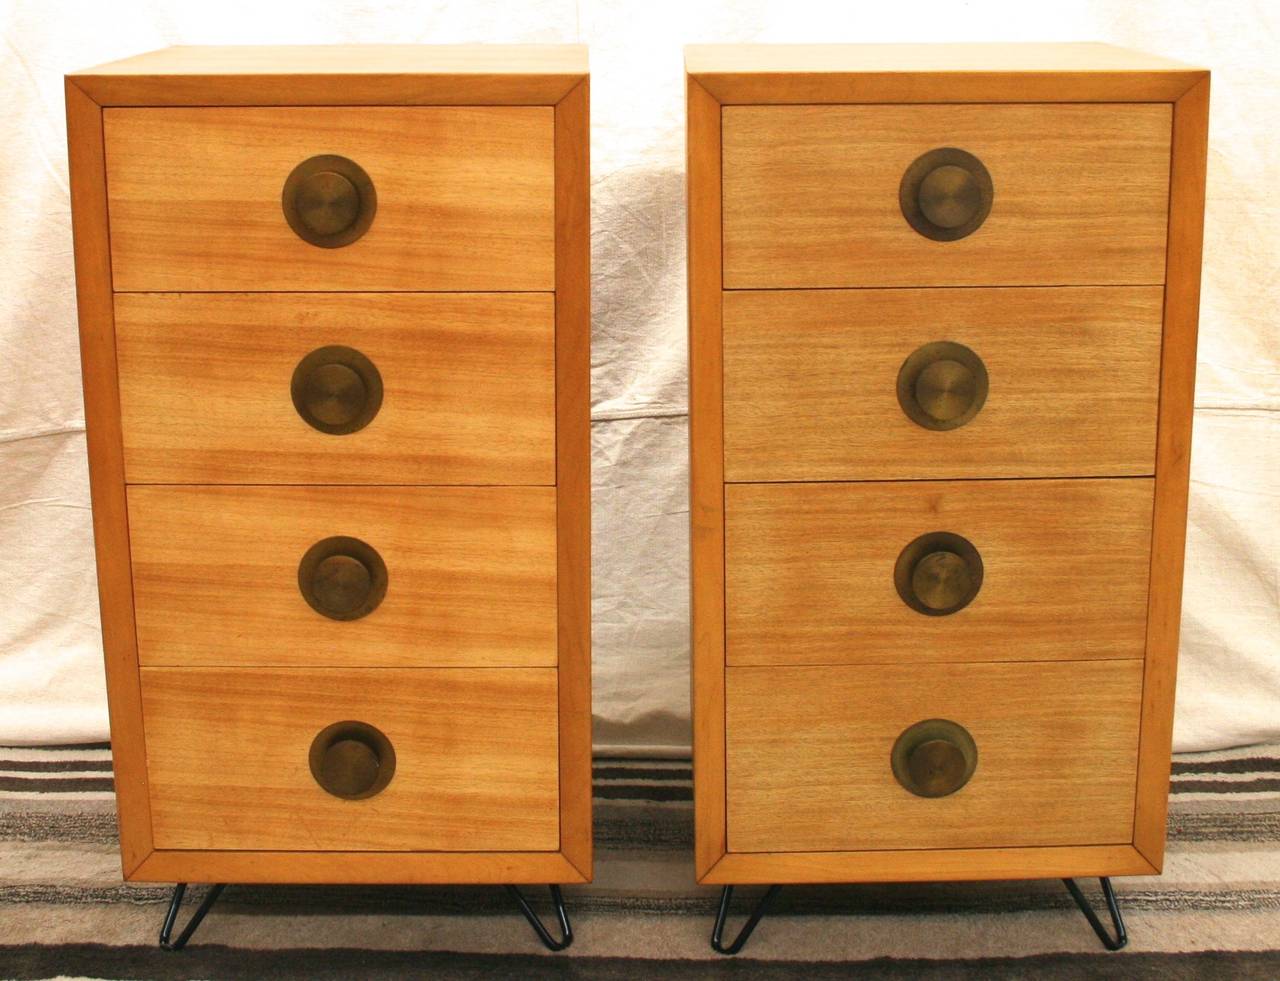 Tall chests or nightstands with four drawers and large brass saucer pulls. Top drawers have a small divided subsection. Stand on a low profile metal hairpin legs.